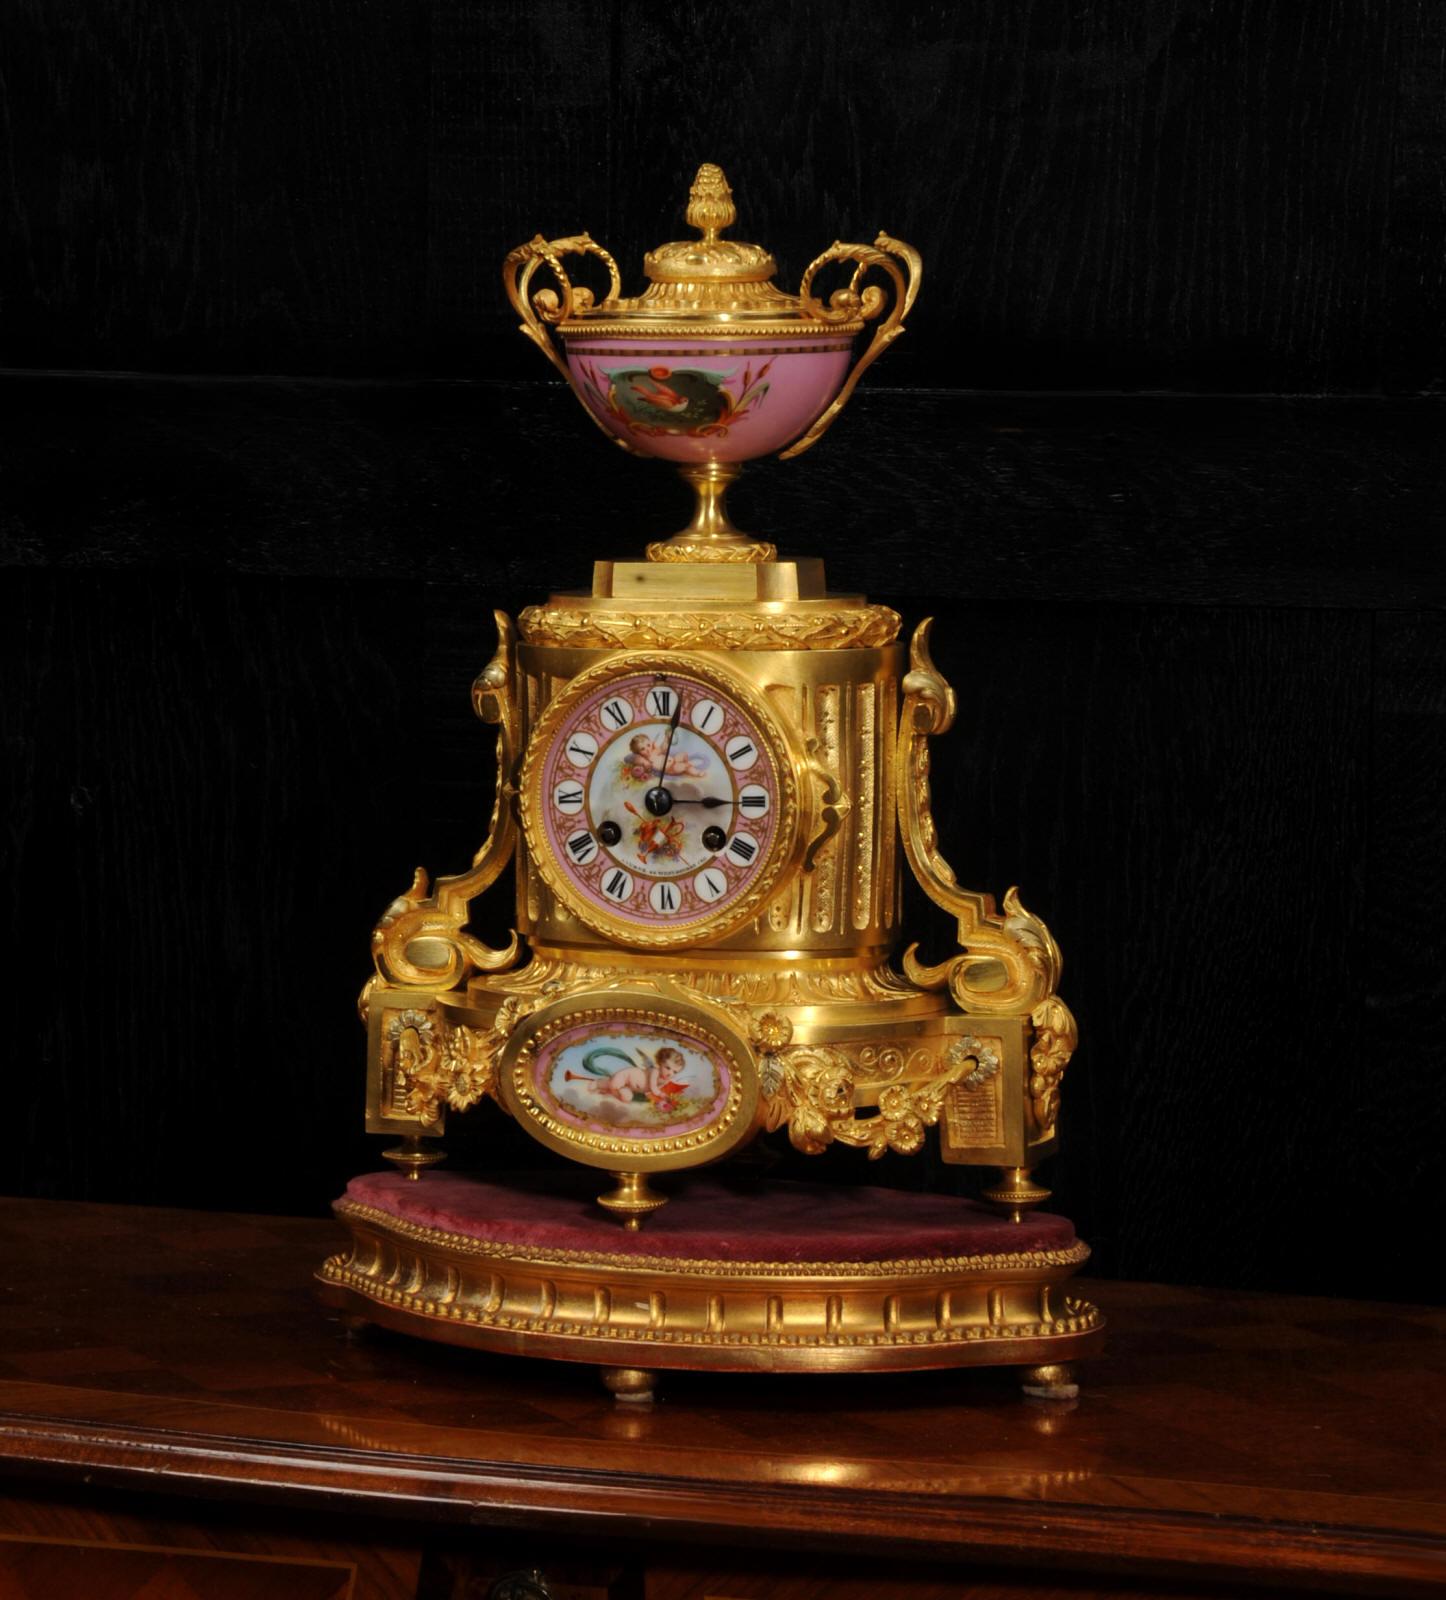 Ormolu and Sevres Porcelain Antique French Clock by Achille Brocot For Sale 1